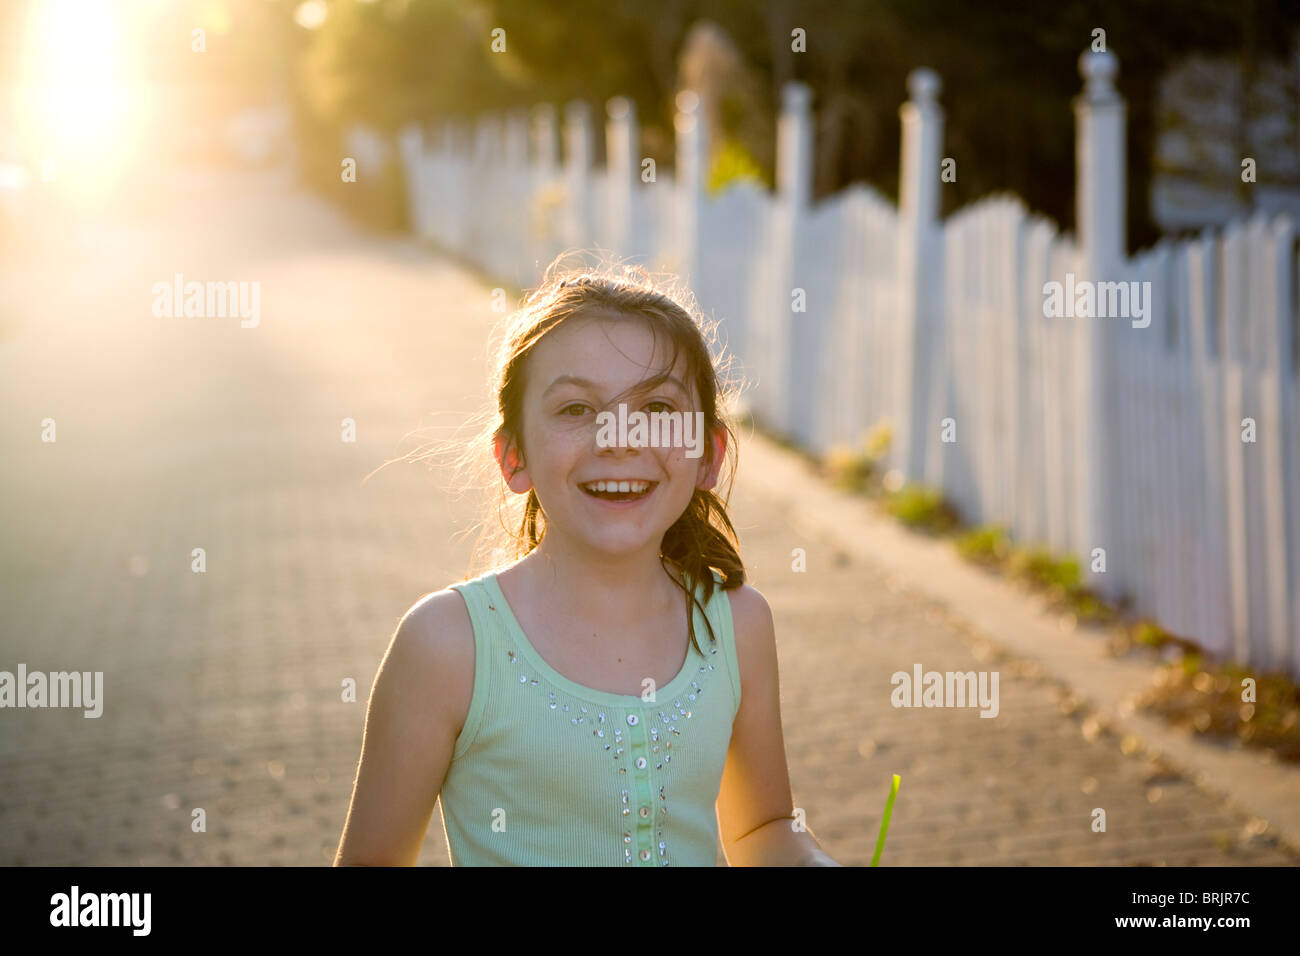 A freckled girl is smiling with a picket fence and sun in the background. Stock Photo